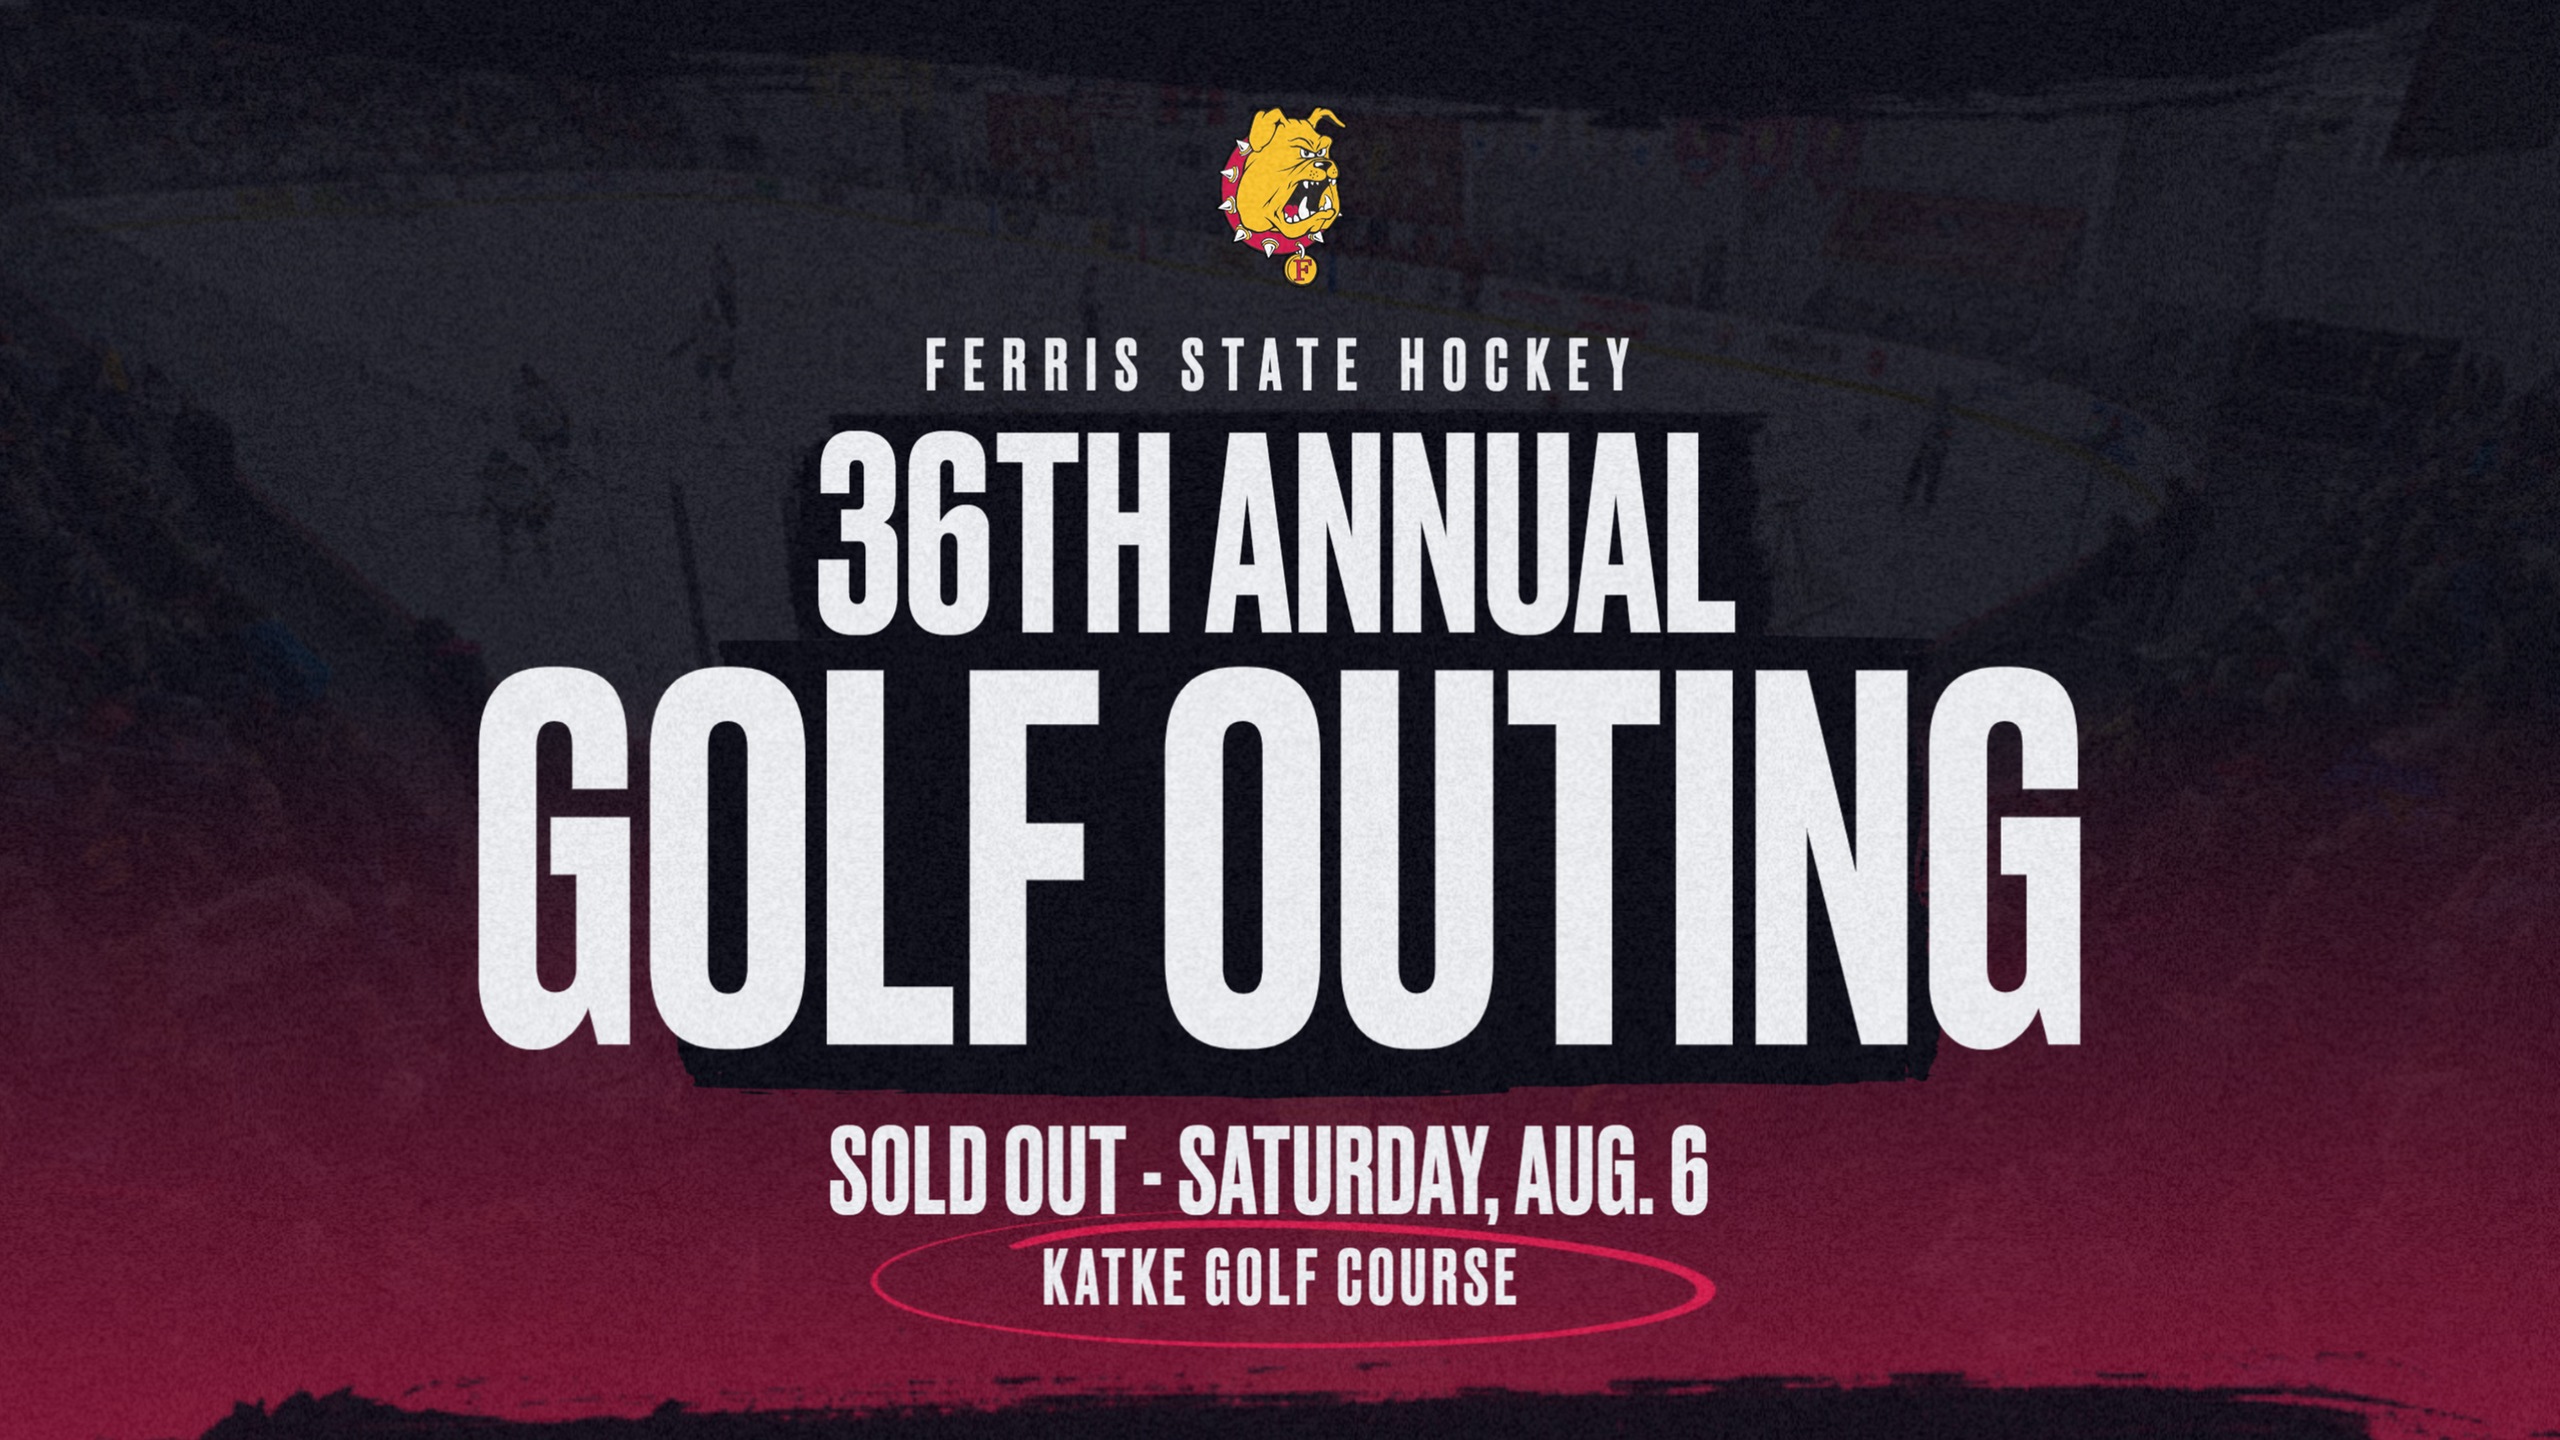 Record Number Of Former Players Expected Back As Ferris State Hockey Golf Outing Events Unfold